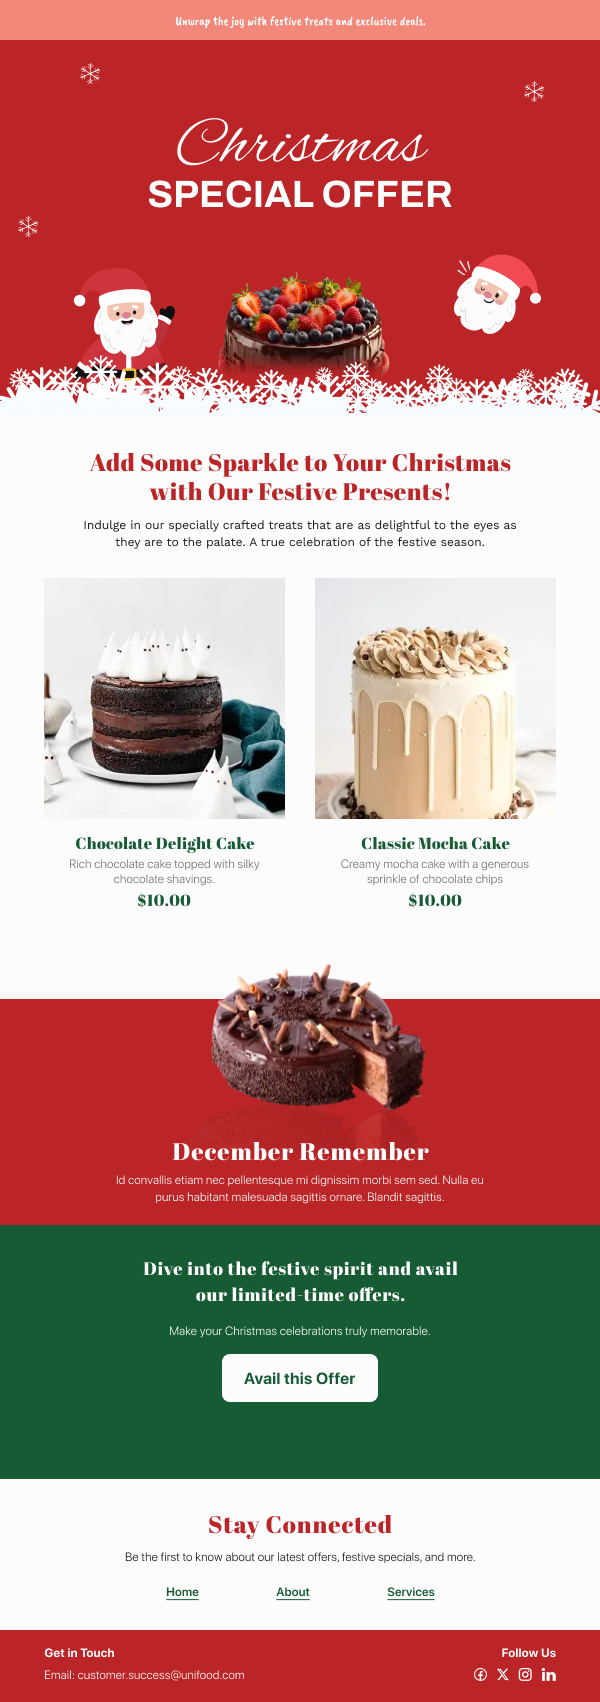 Restaurant-Special Offers On Cakes